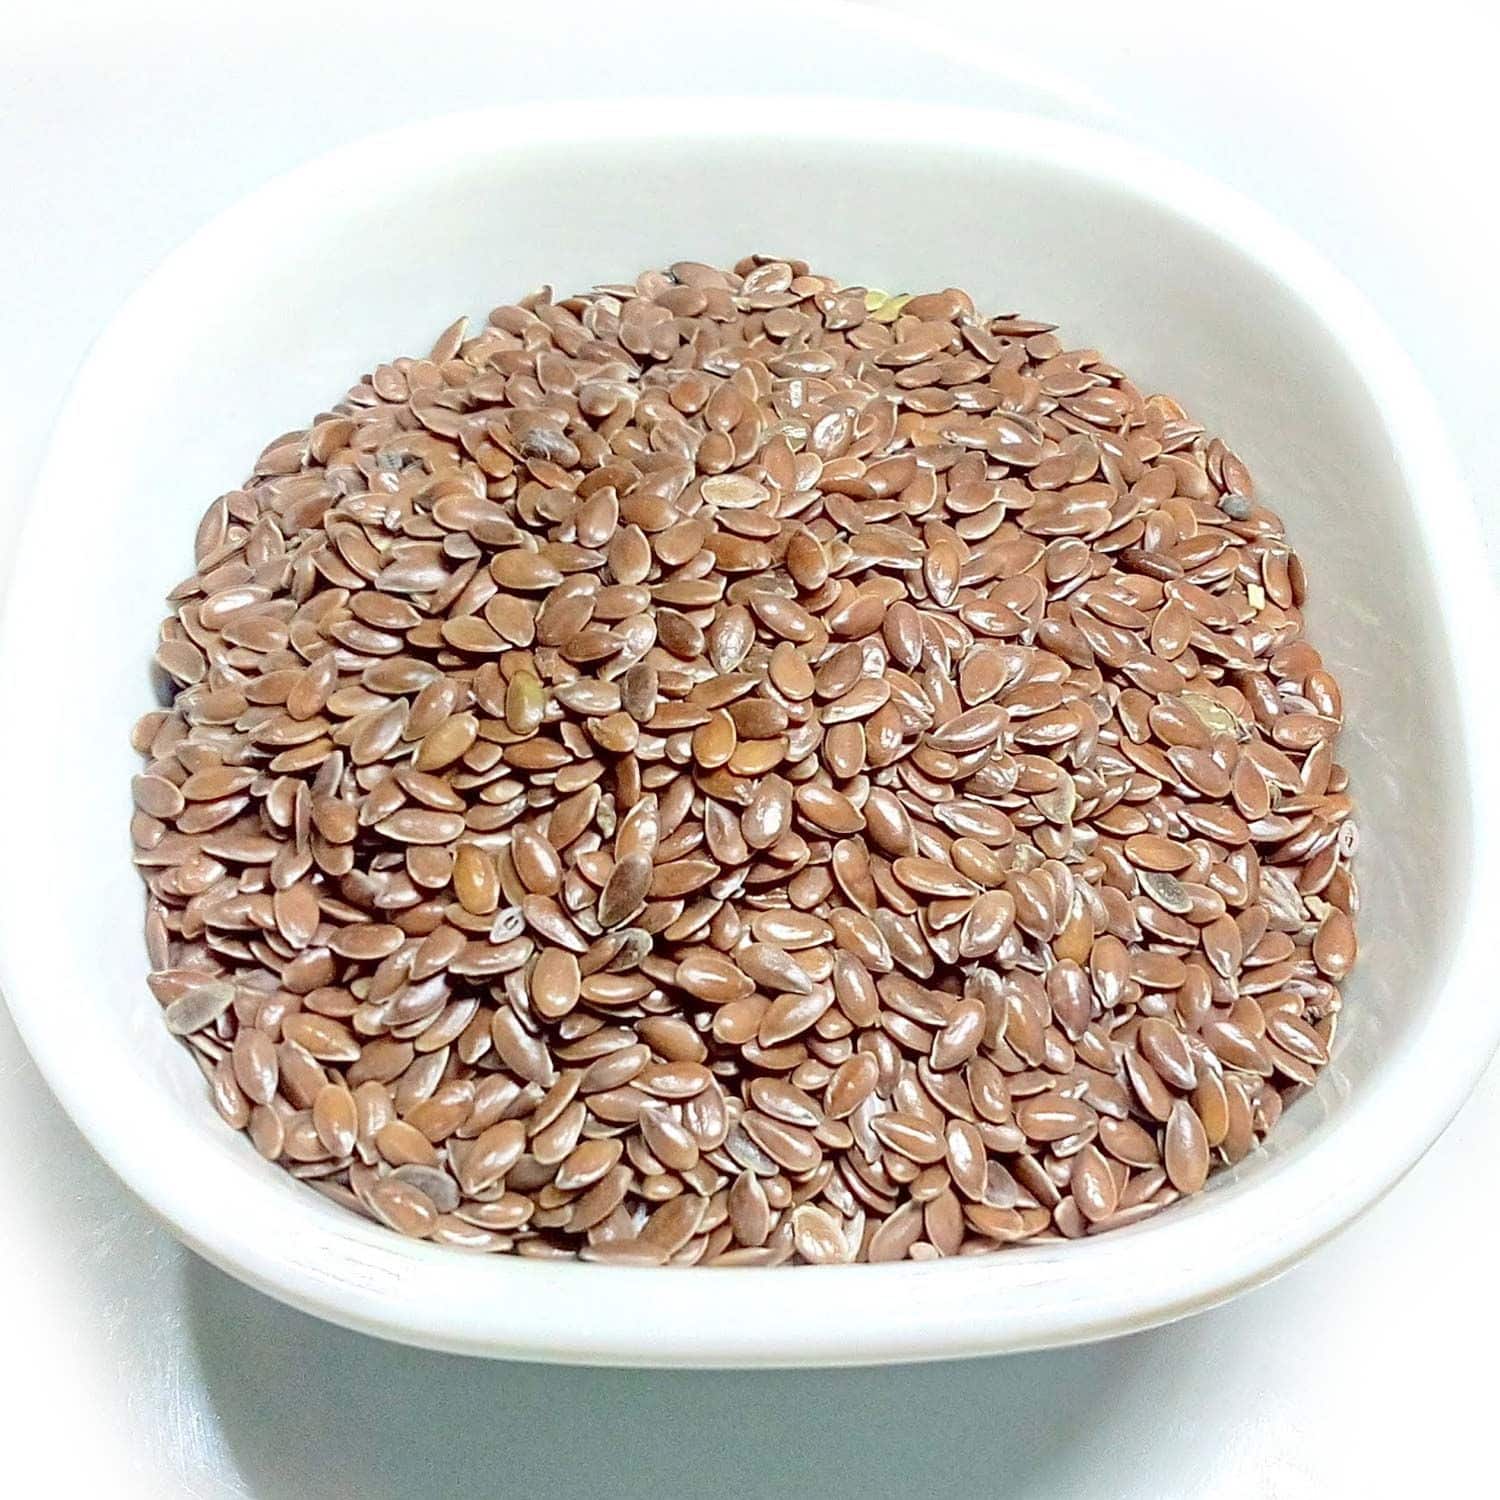 How Long Does Flax Seed Last?